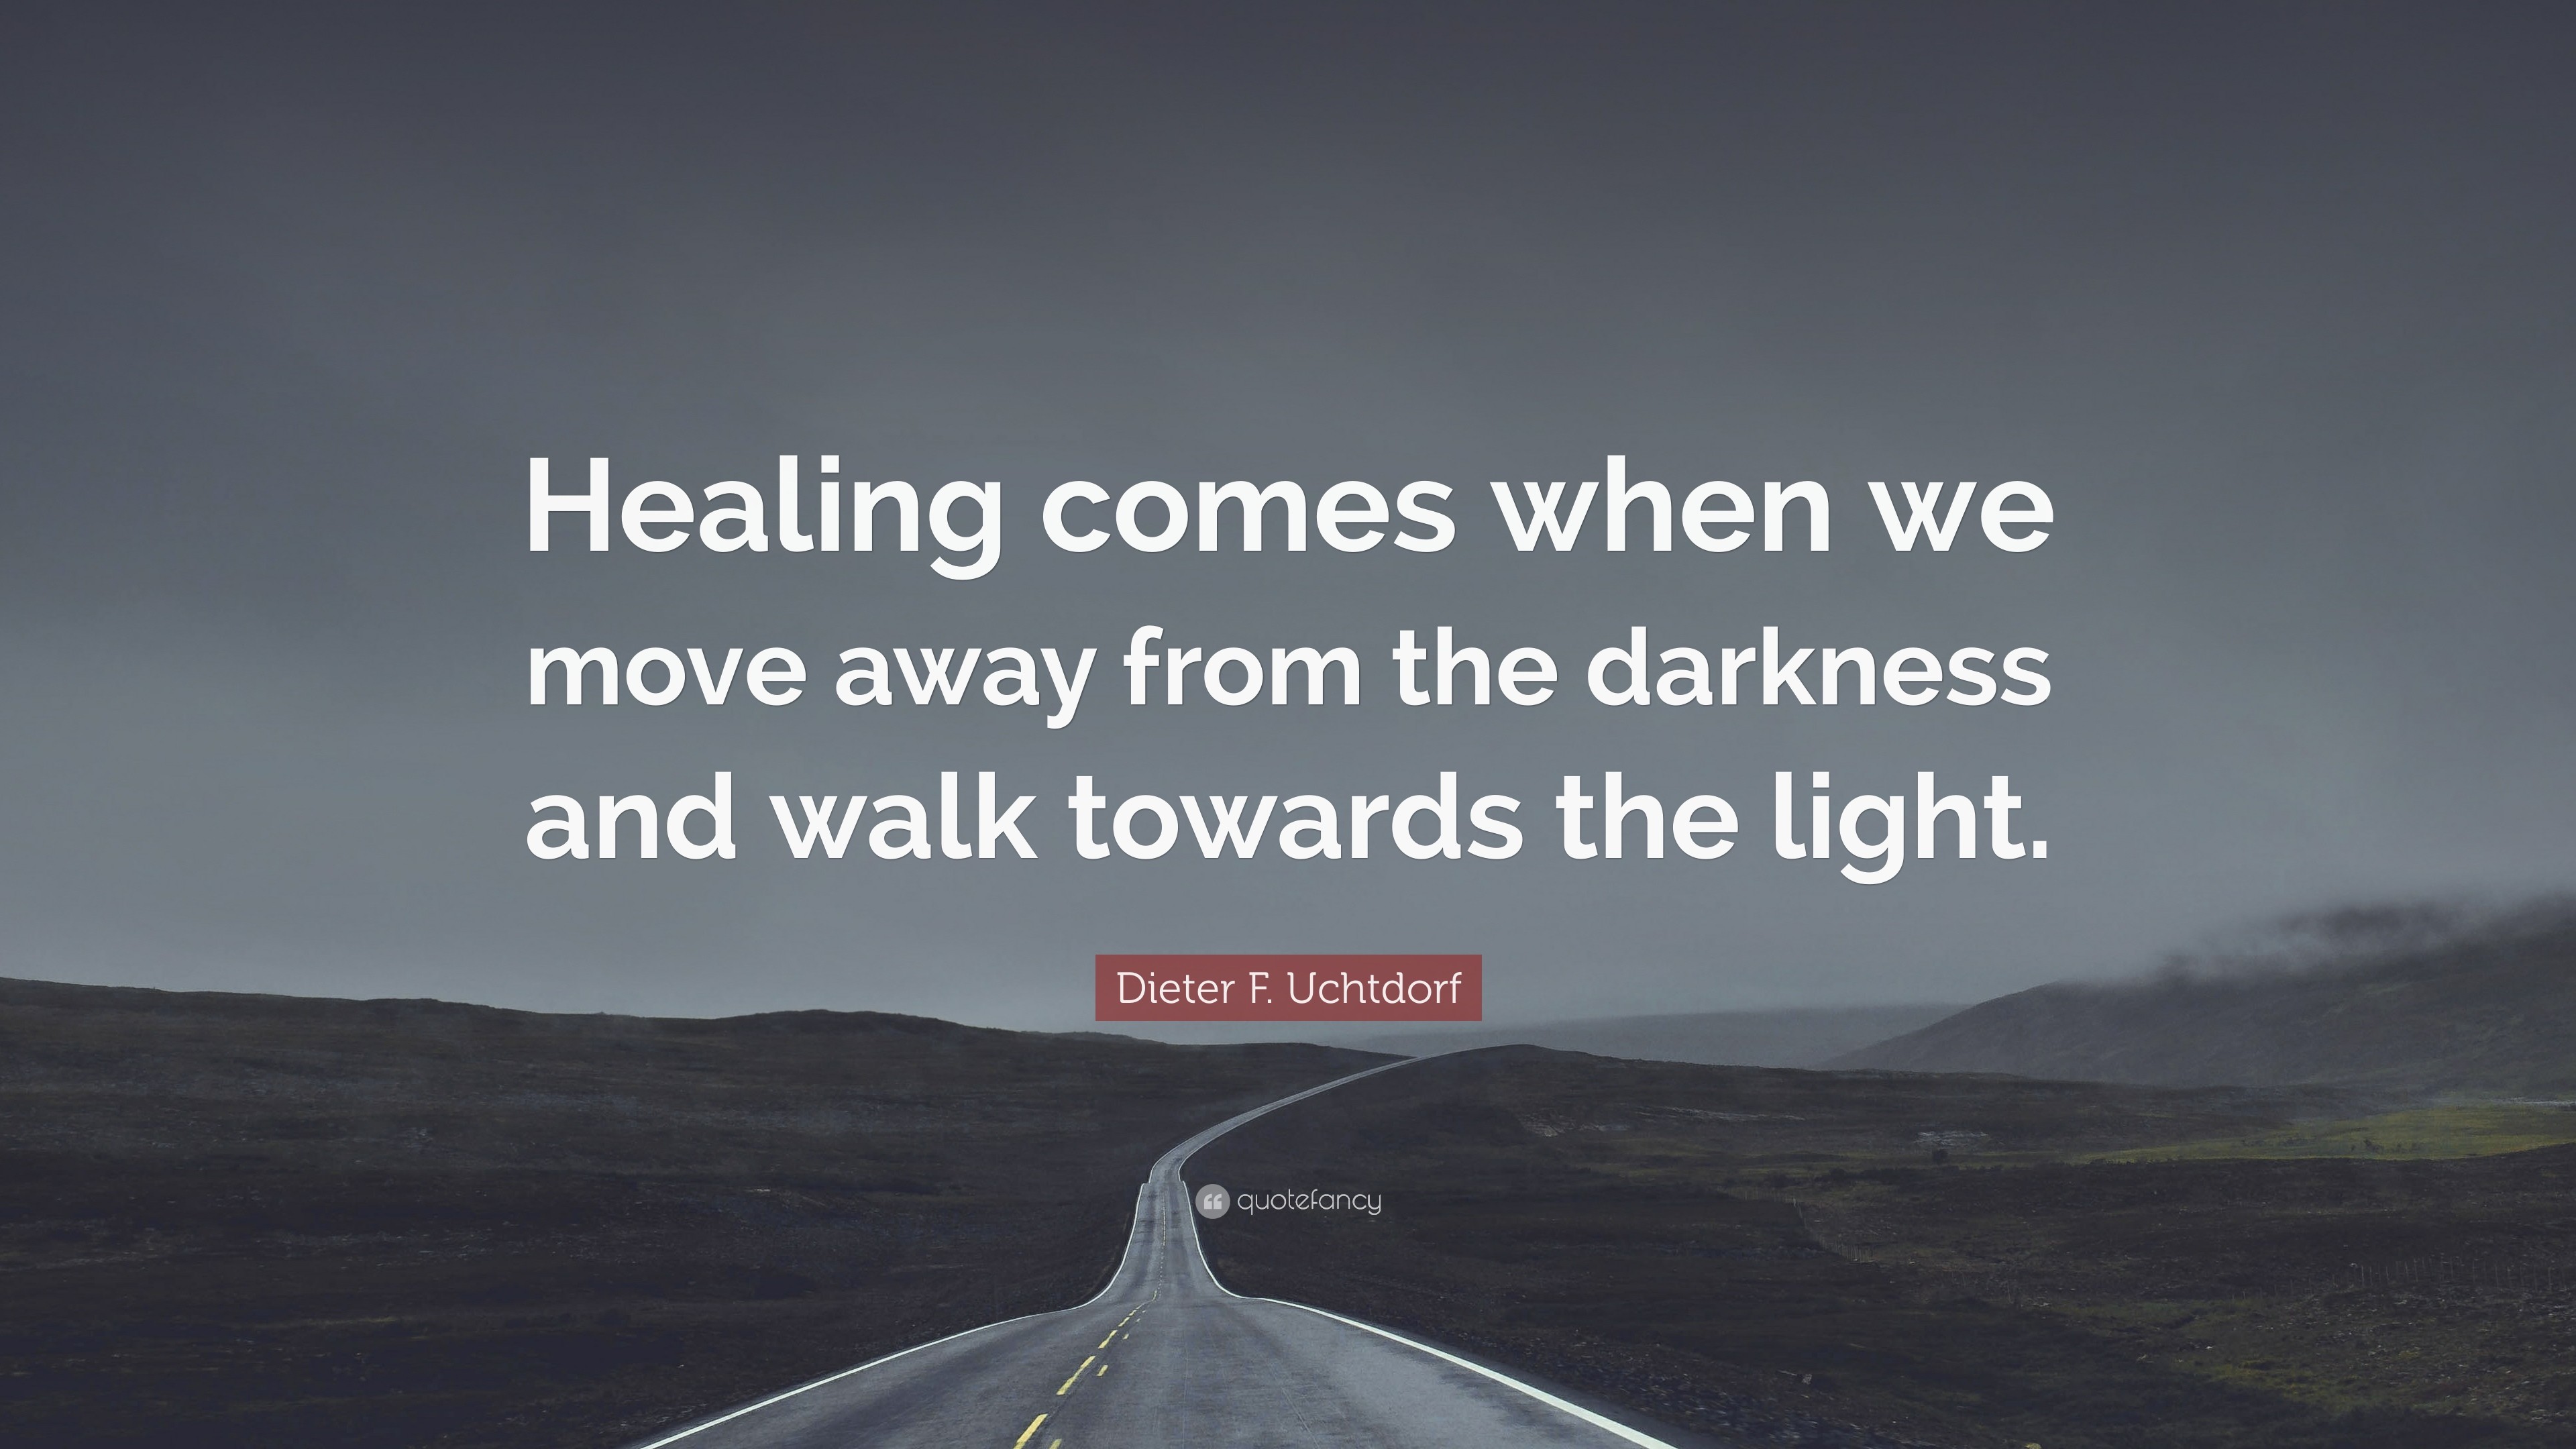 3840x2160 Dieter F. Uchtdorf Quote: “Healing comes when we move away from the darkness